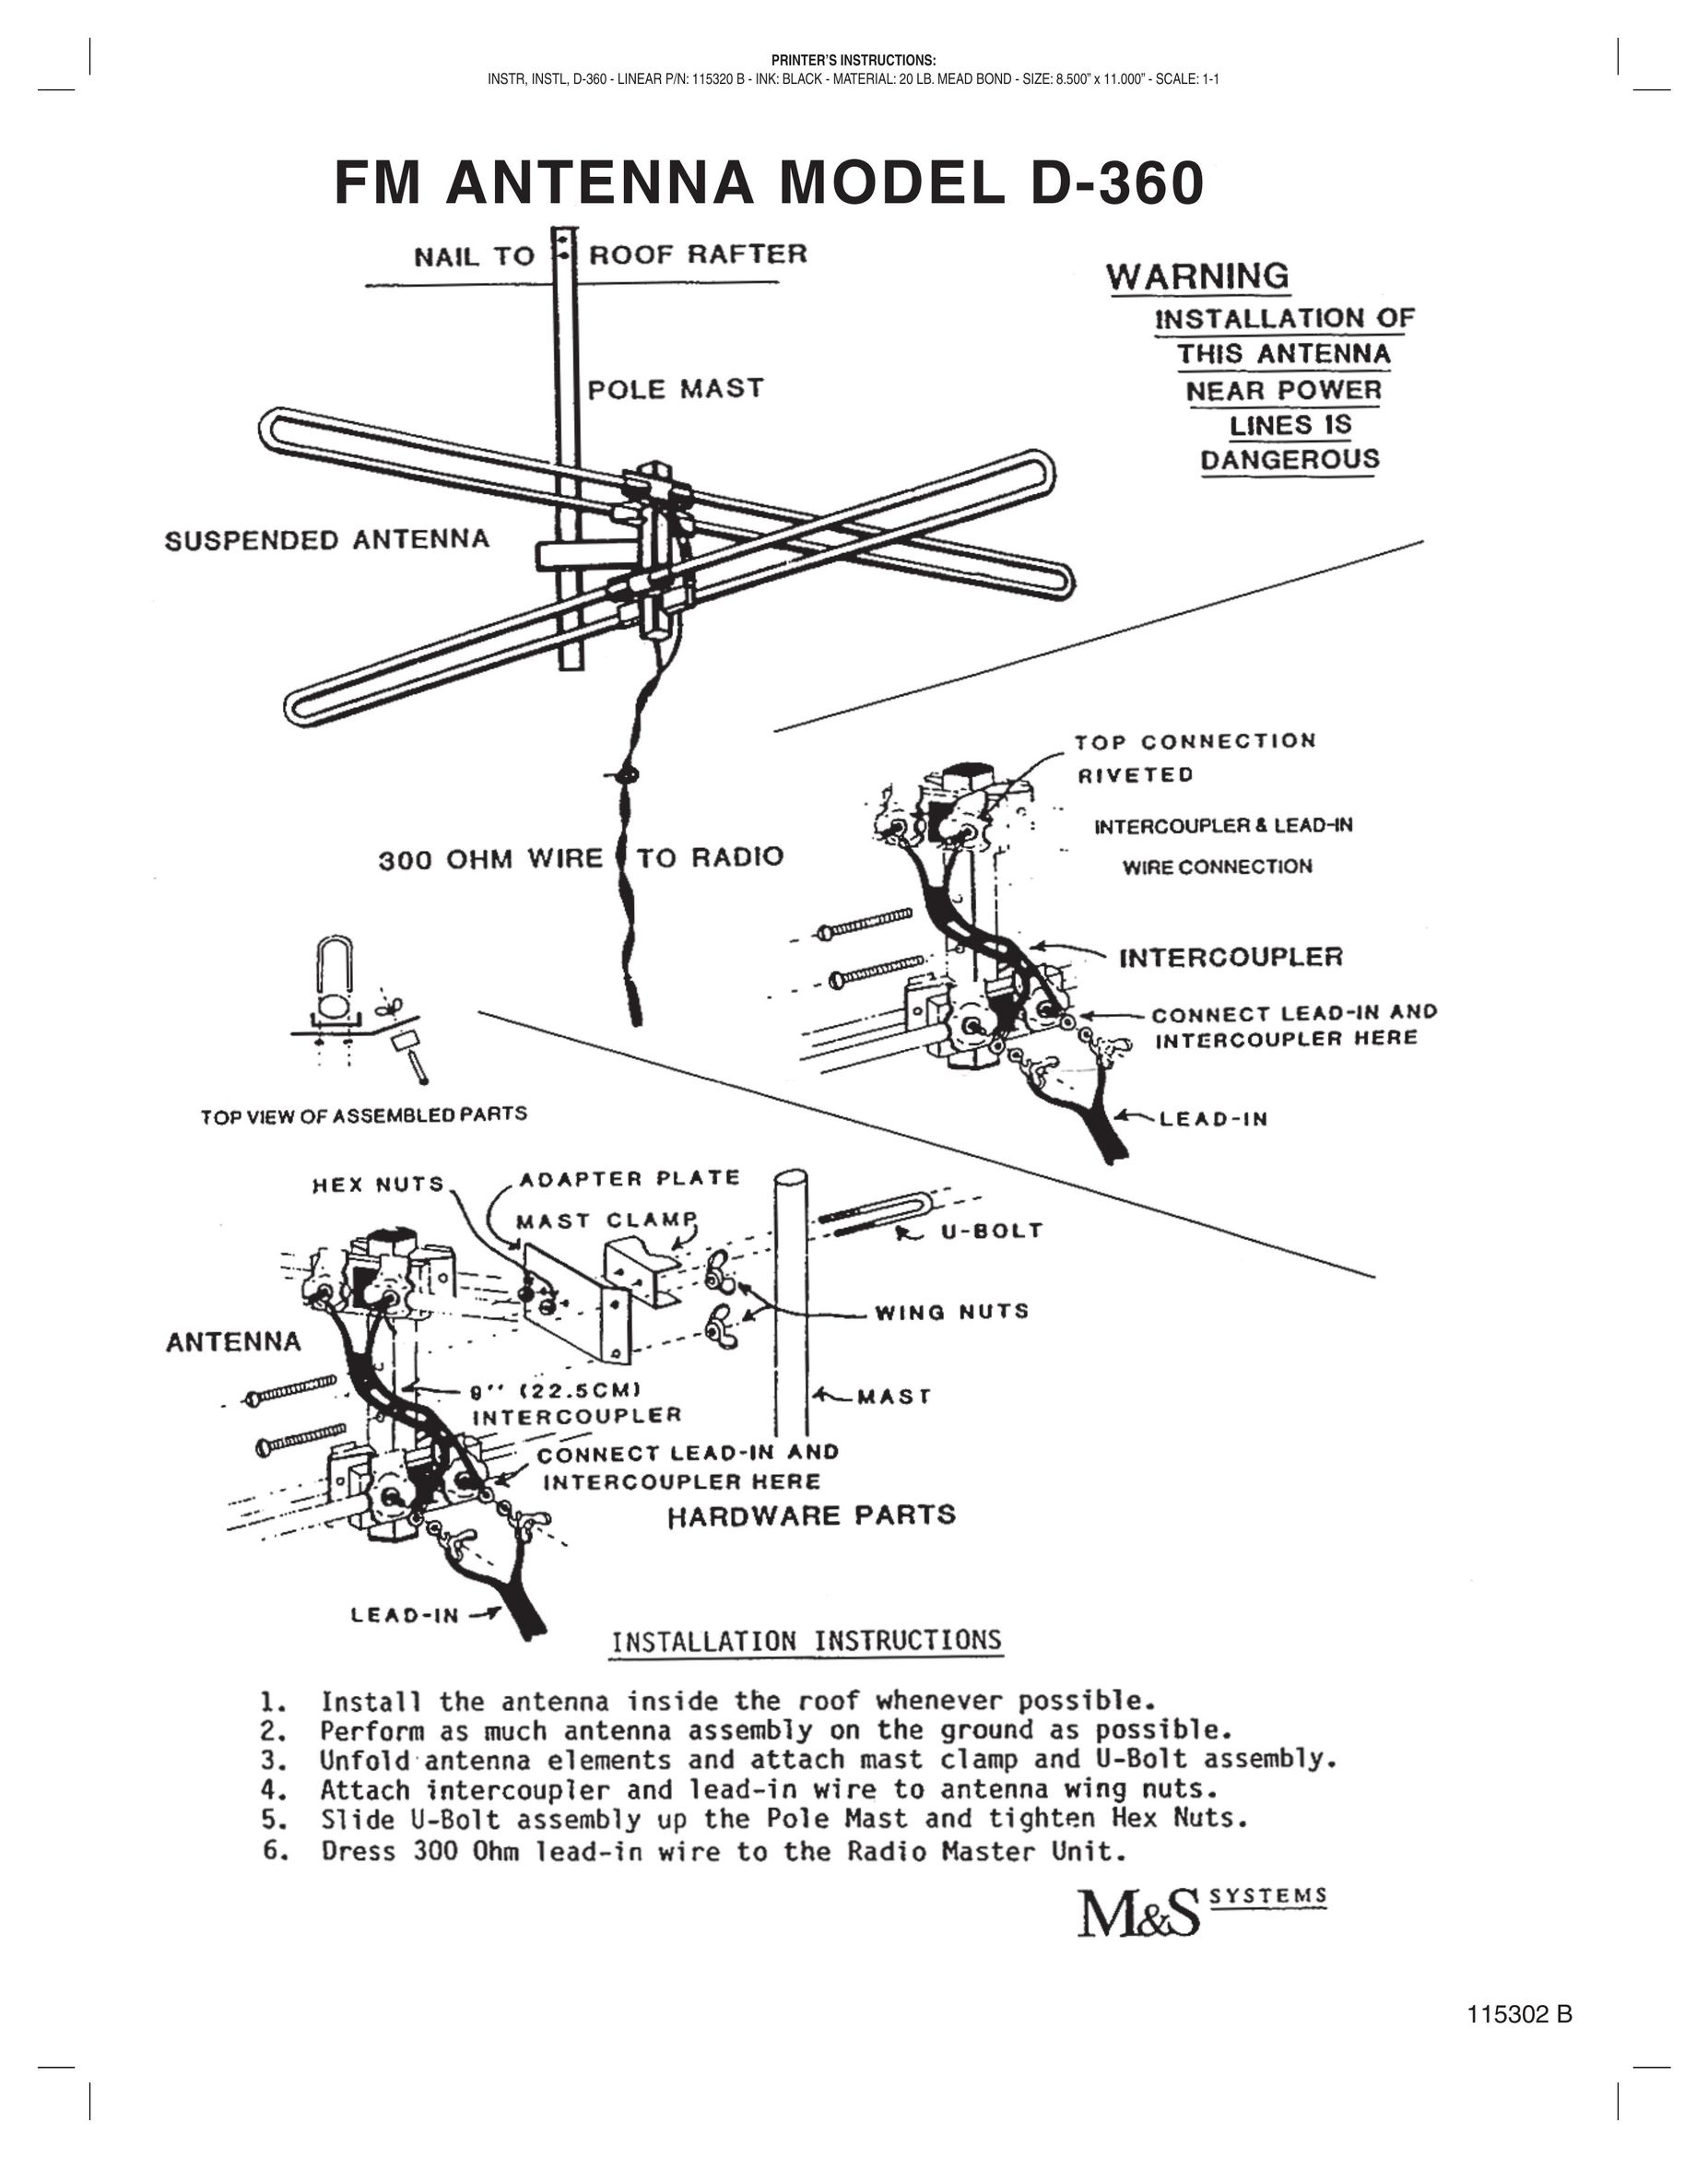 M&S Systems D-360 Radio Antenna User Manual